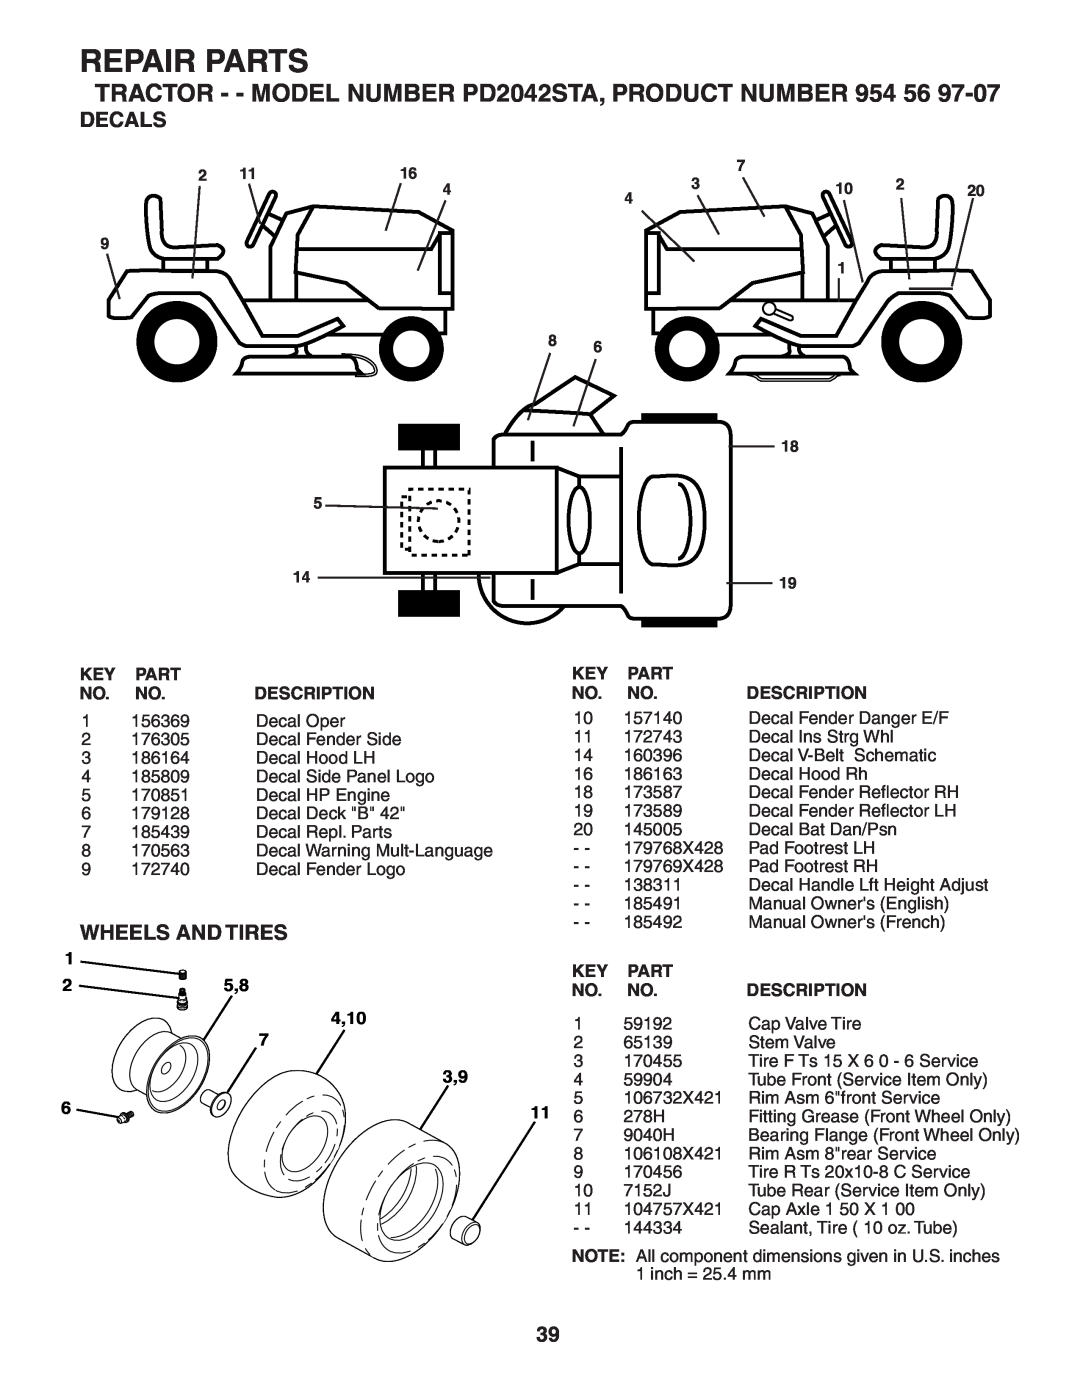 Poulan 185491, 954569707 Decals, Wheels And Tires, Repair Parts, TRACTOR - - MODEL NUMBER PD2042STA, PRODUCT NUMBER 